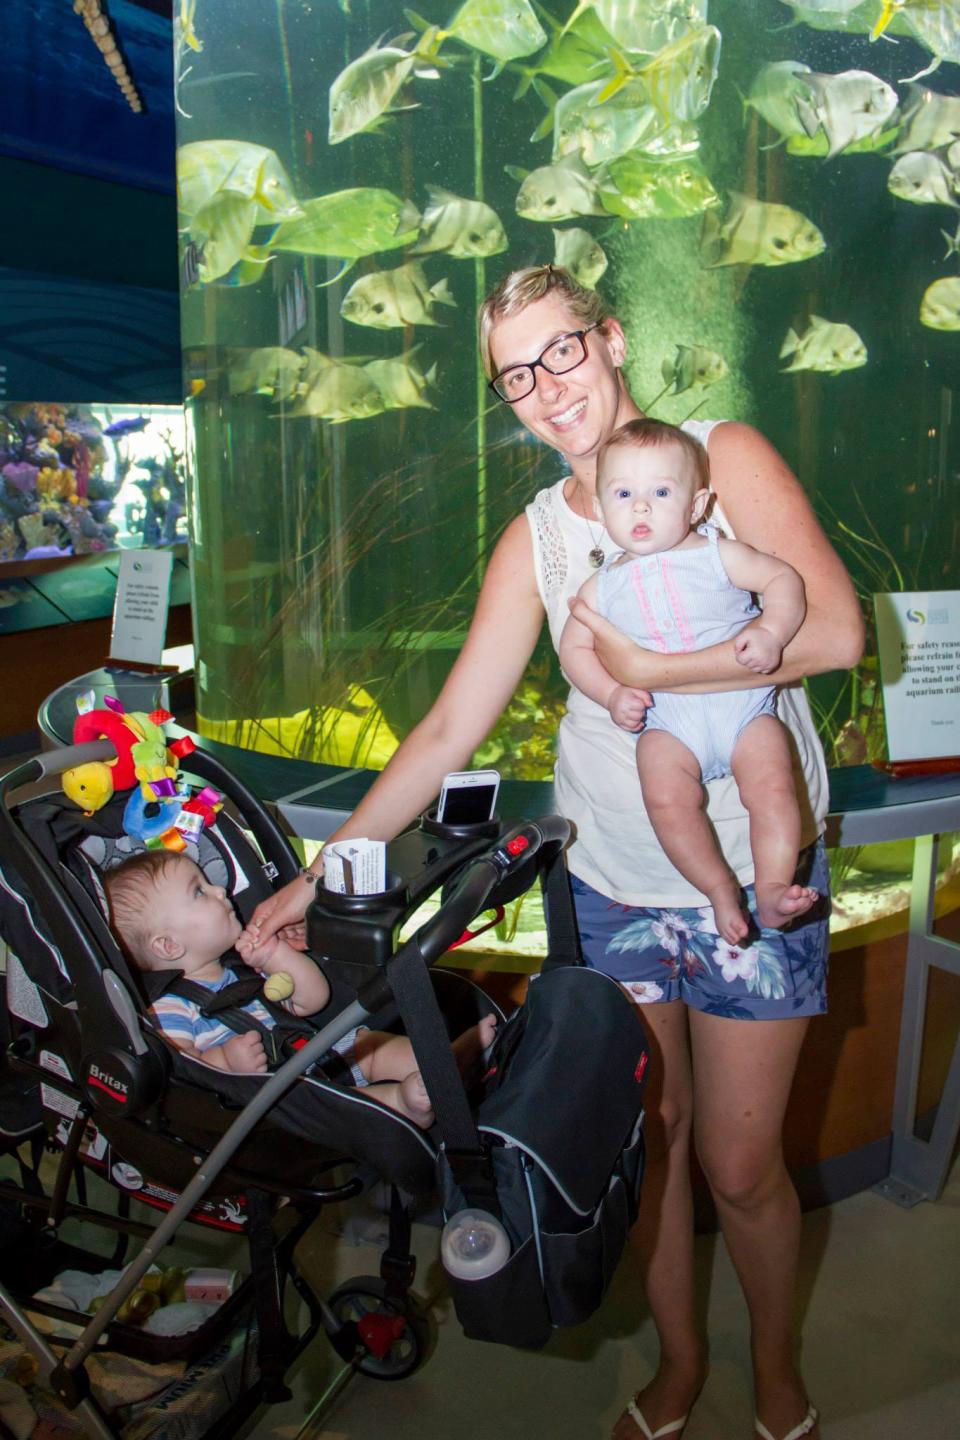 Experience “Stroller Daze” at the Cox Science Center & Aquarium this Wednesday.